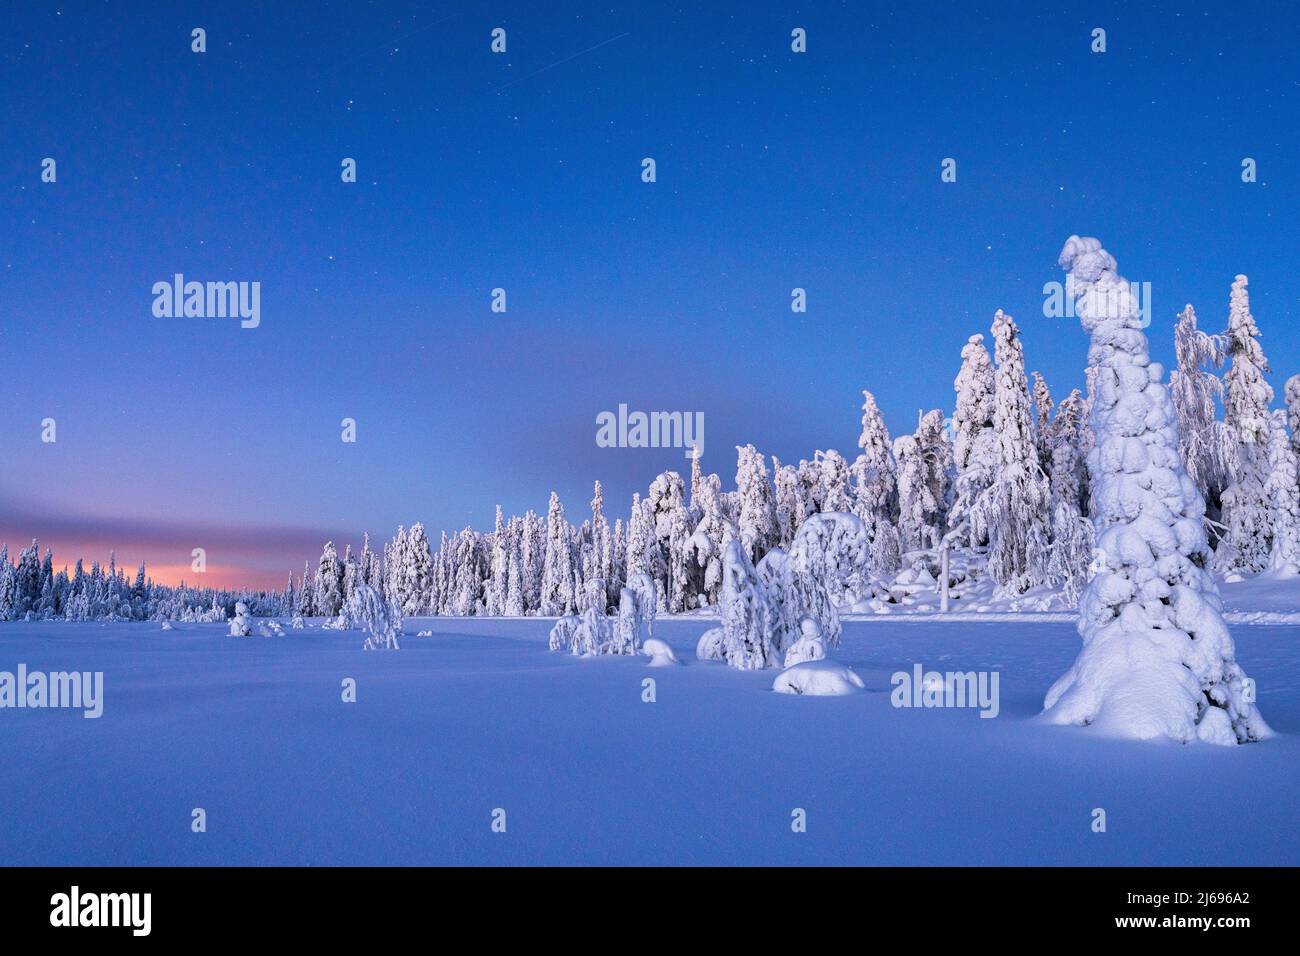 Frozen spruce trees covered with snow during winter dusk, Lapland, Finland, Europe Stock Photo